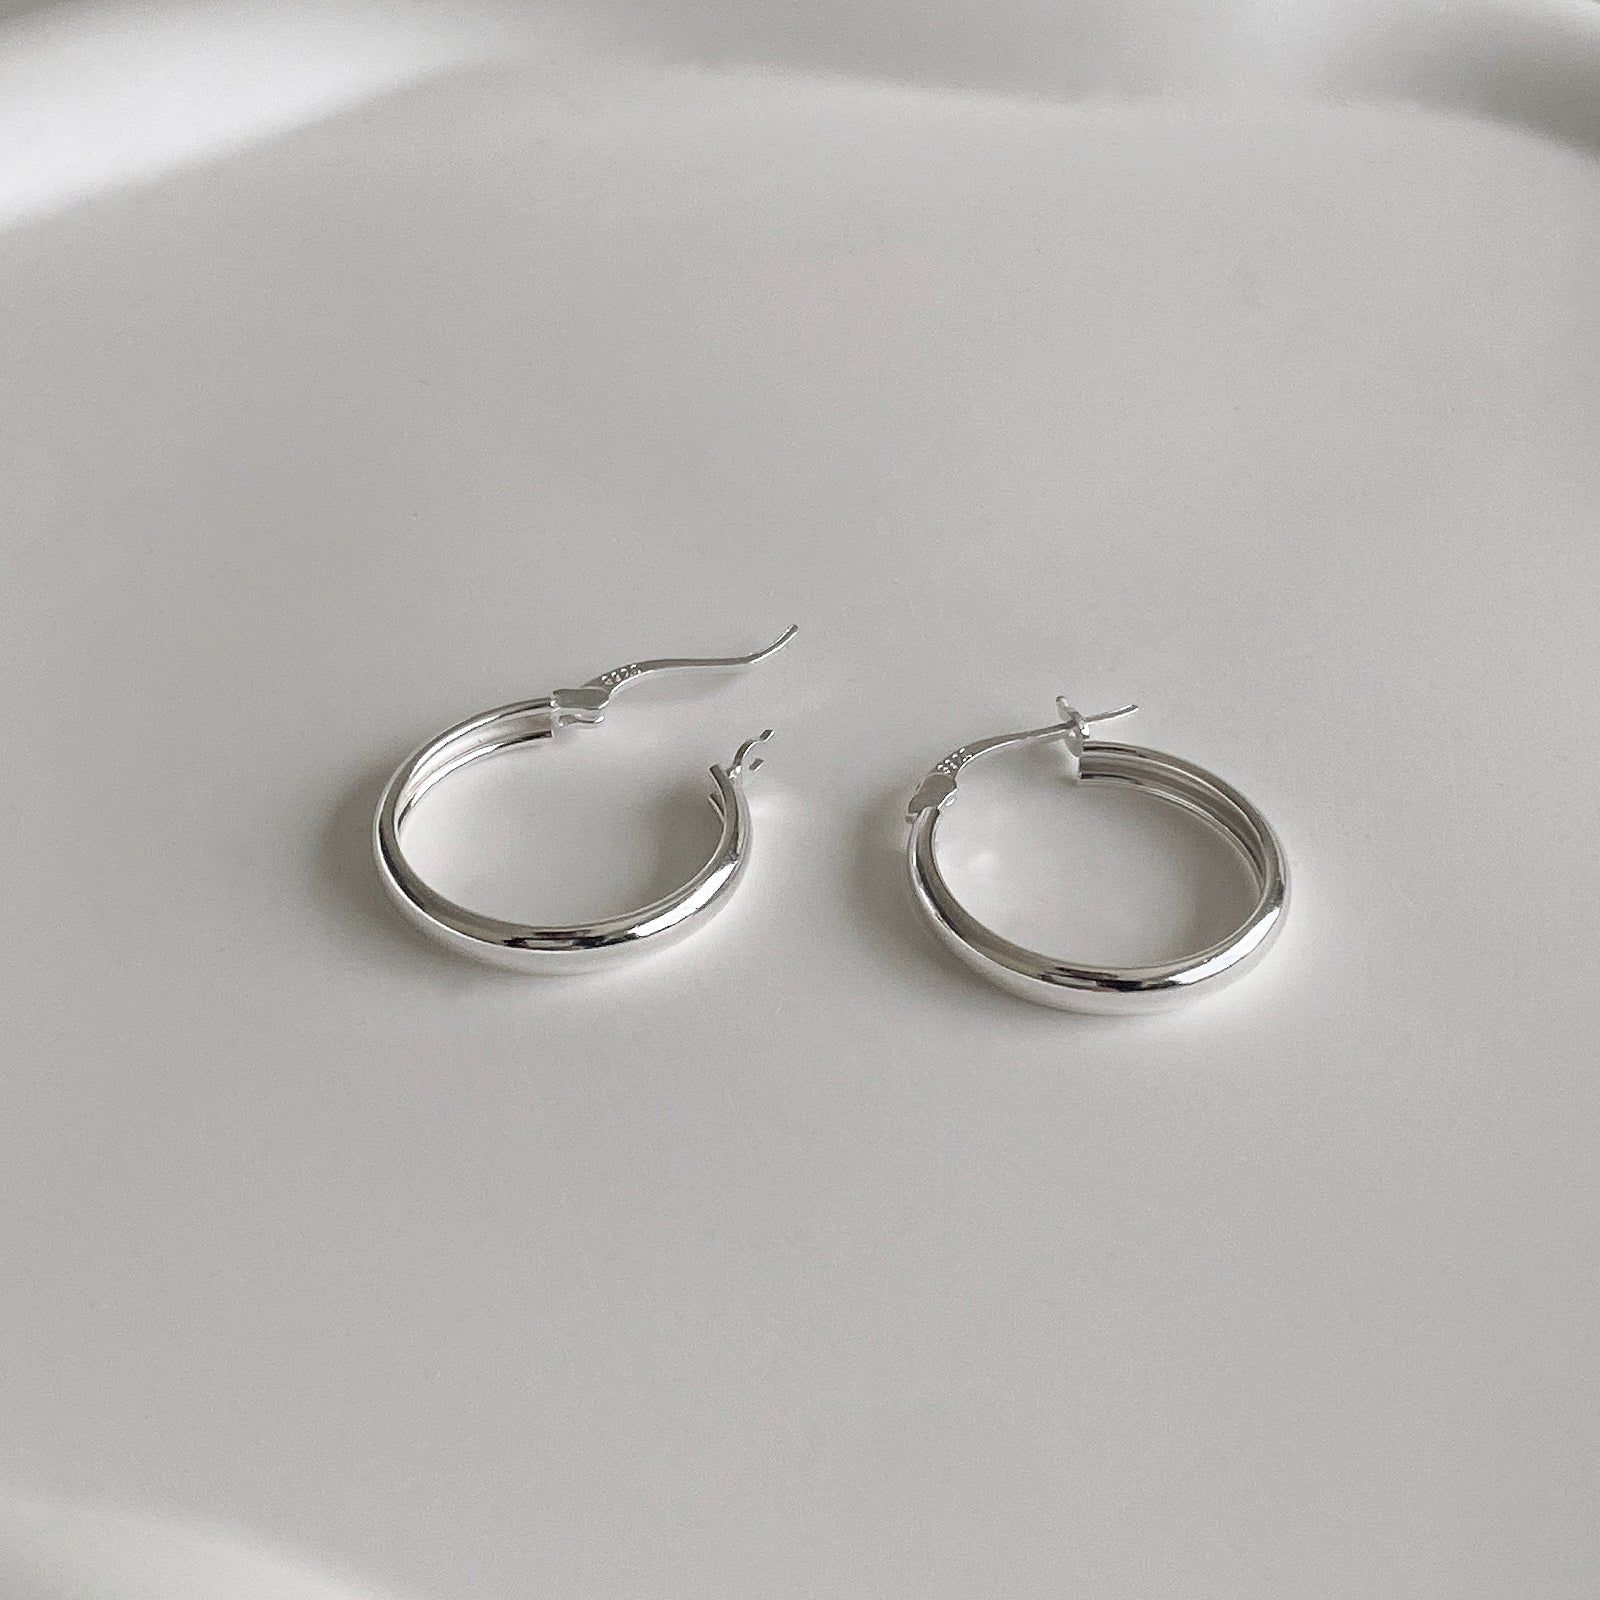 Side view of Jane Hoops 20mm are classic hoop earrings with a latch back for closure. It's made of 925 sterling silver with a shiny smooth finish. Perfect hoop earrings for everyday.